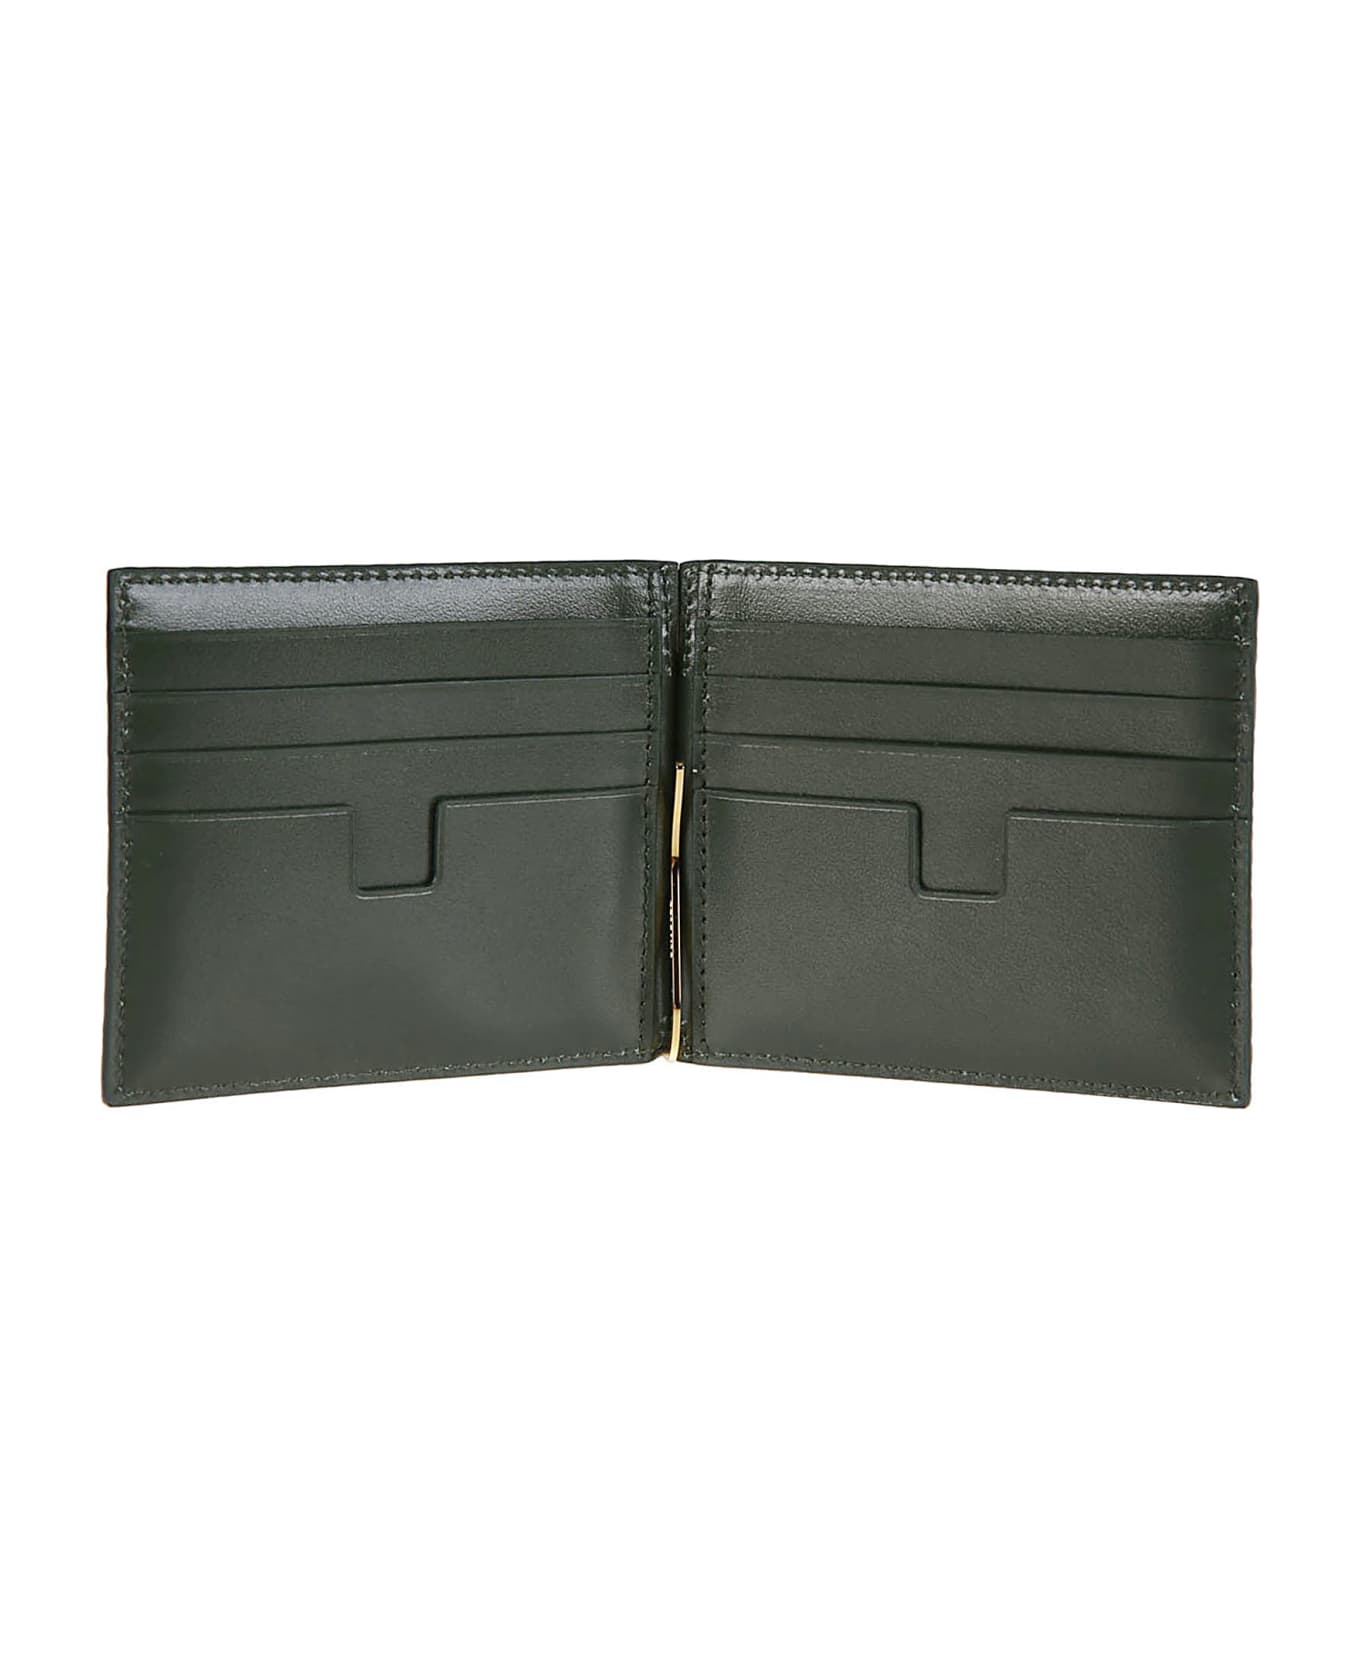 Tom Ford Printed Alligator Money Clip Wallet - Rifle Green 財布